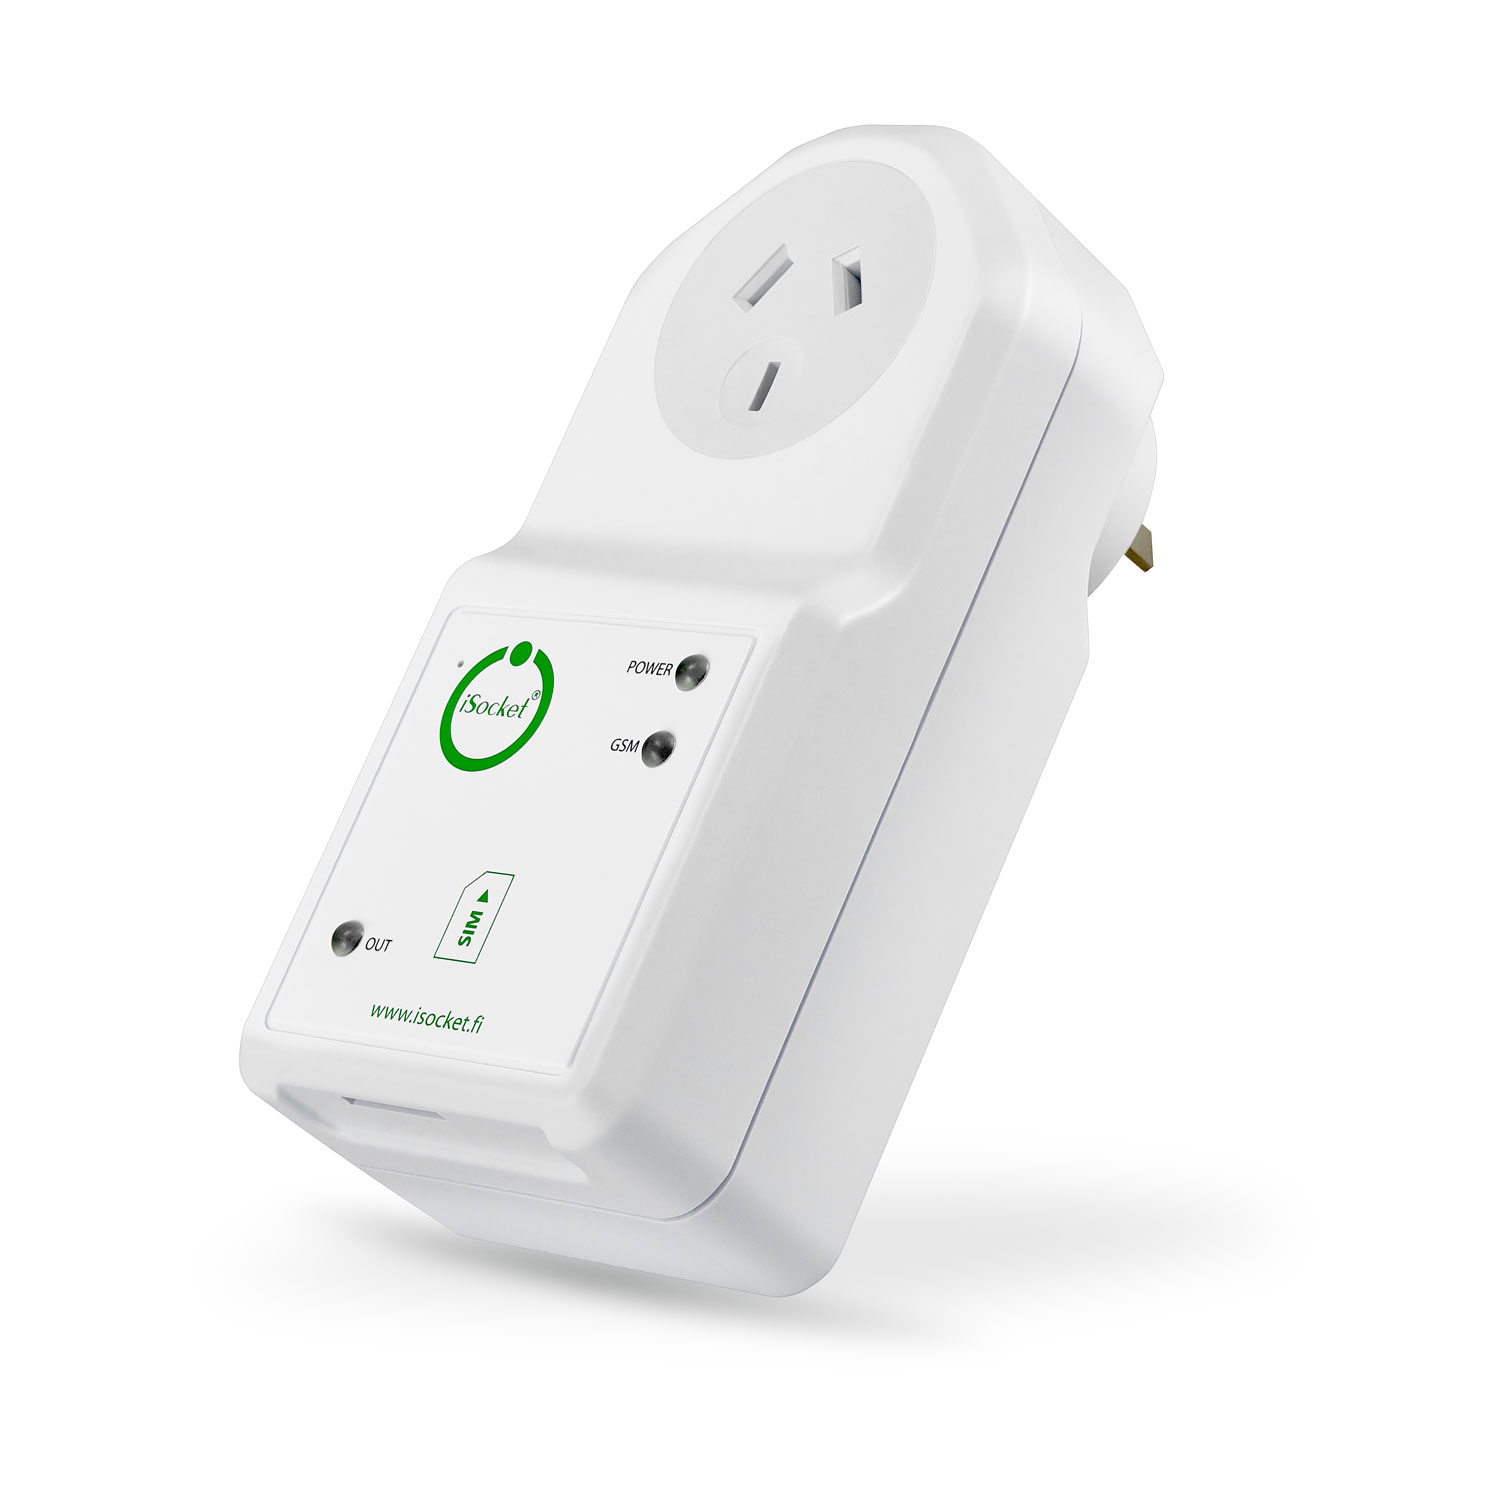 iSocket is an intelligent socket that plugs in to the power point and can inform you about power outage.